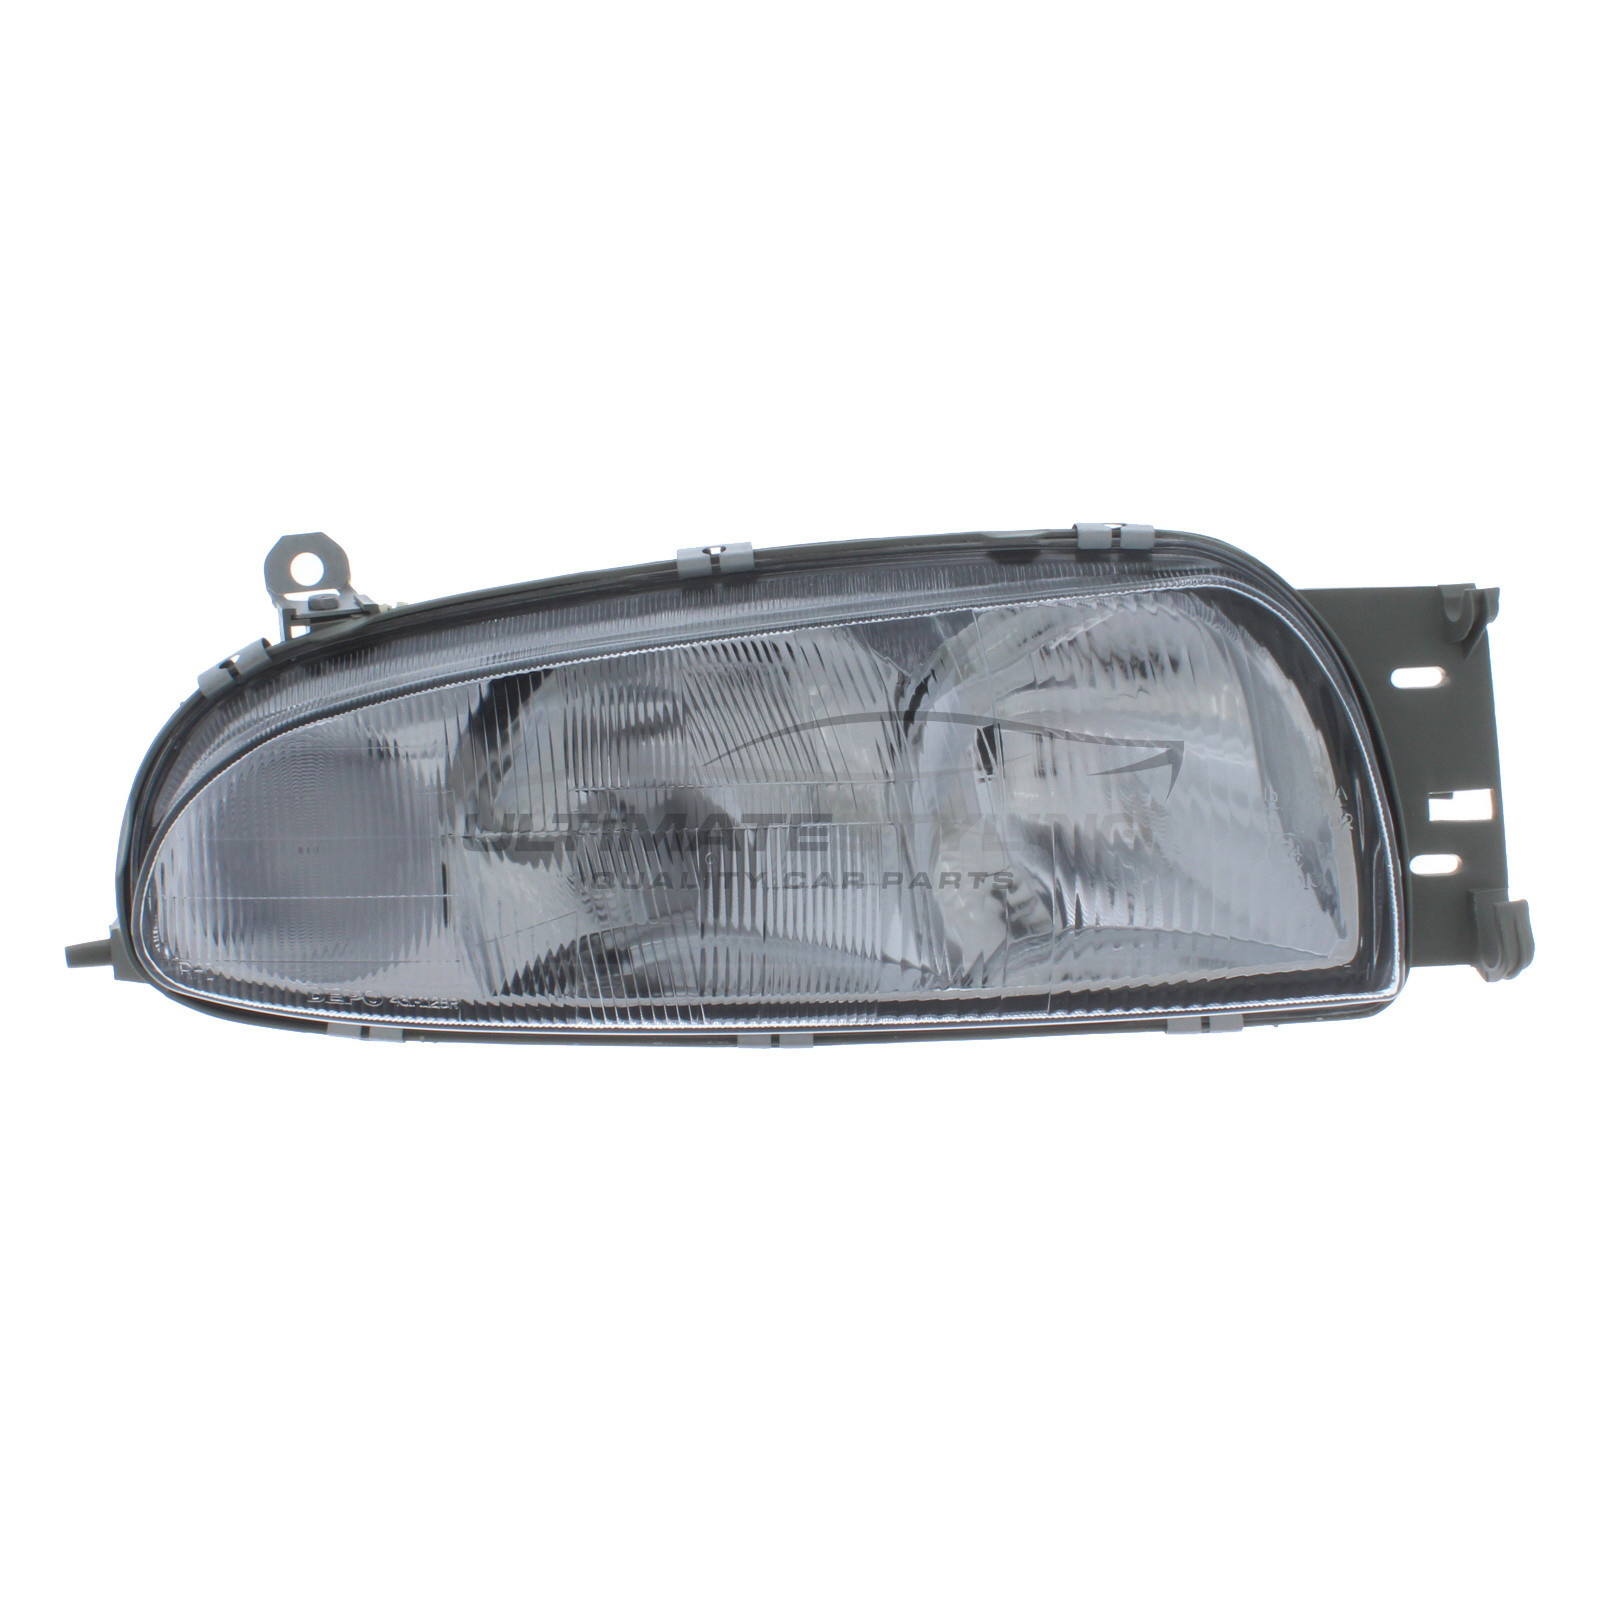 Ford Fiesta 1995-1999, Courier 1996-2000, Mazda 121 1996-2000 Halogen, Electric Without Motor, Chrome Headlight / Headlamp Drivers Side (RH)